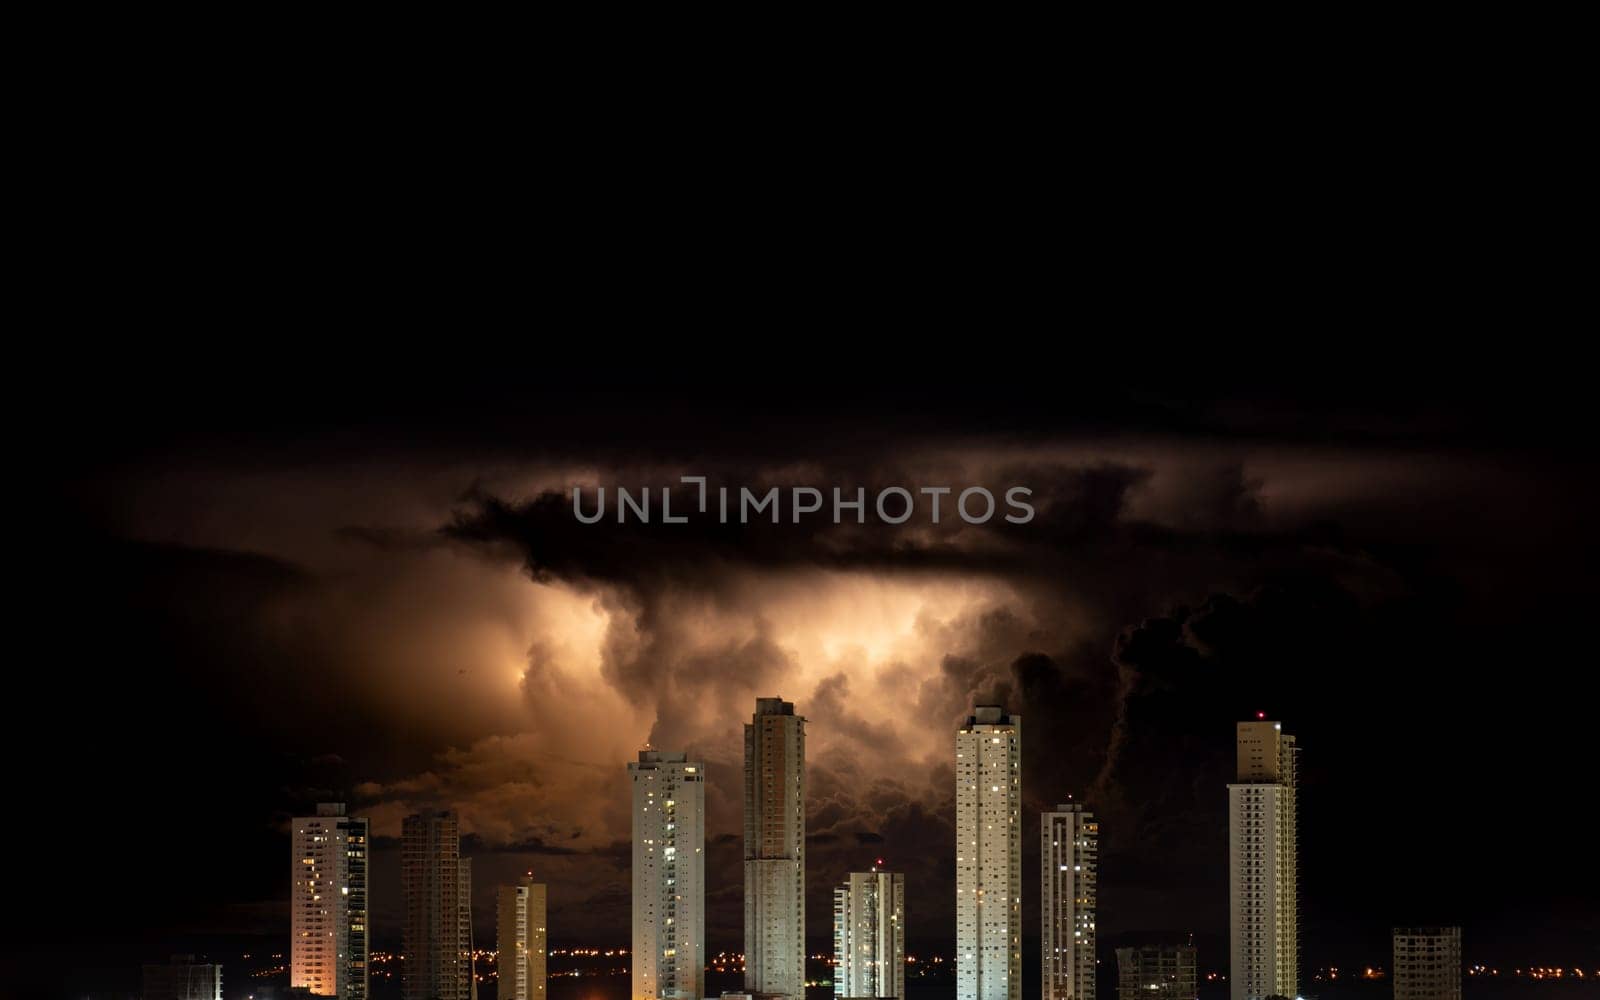 Massive skyscrapers form a barrier against the orange fire-like storm in the dark night sky.